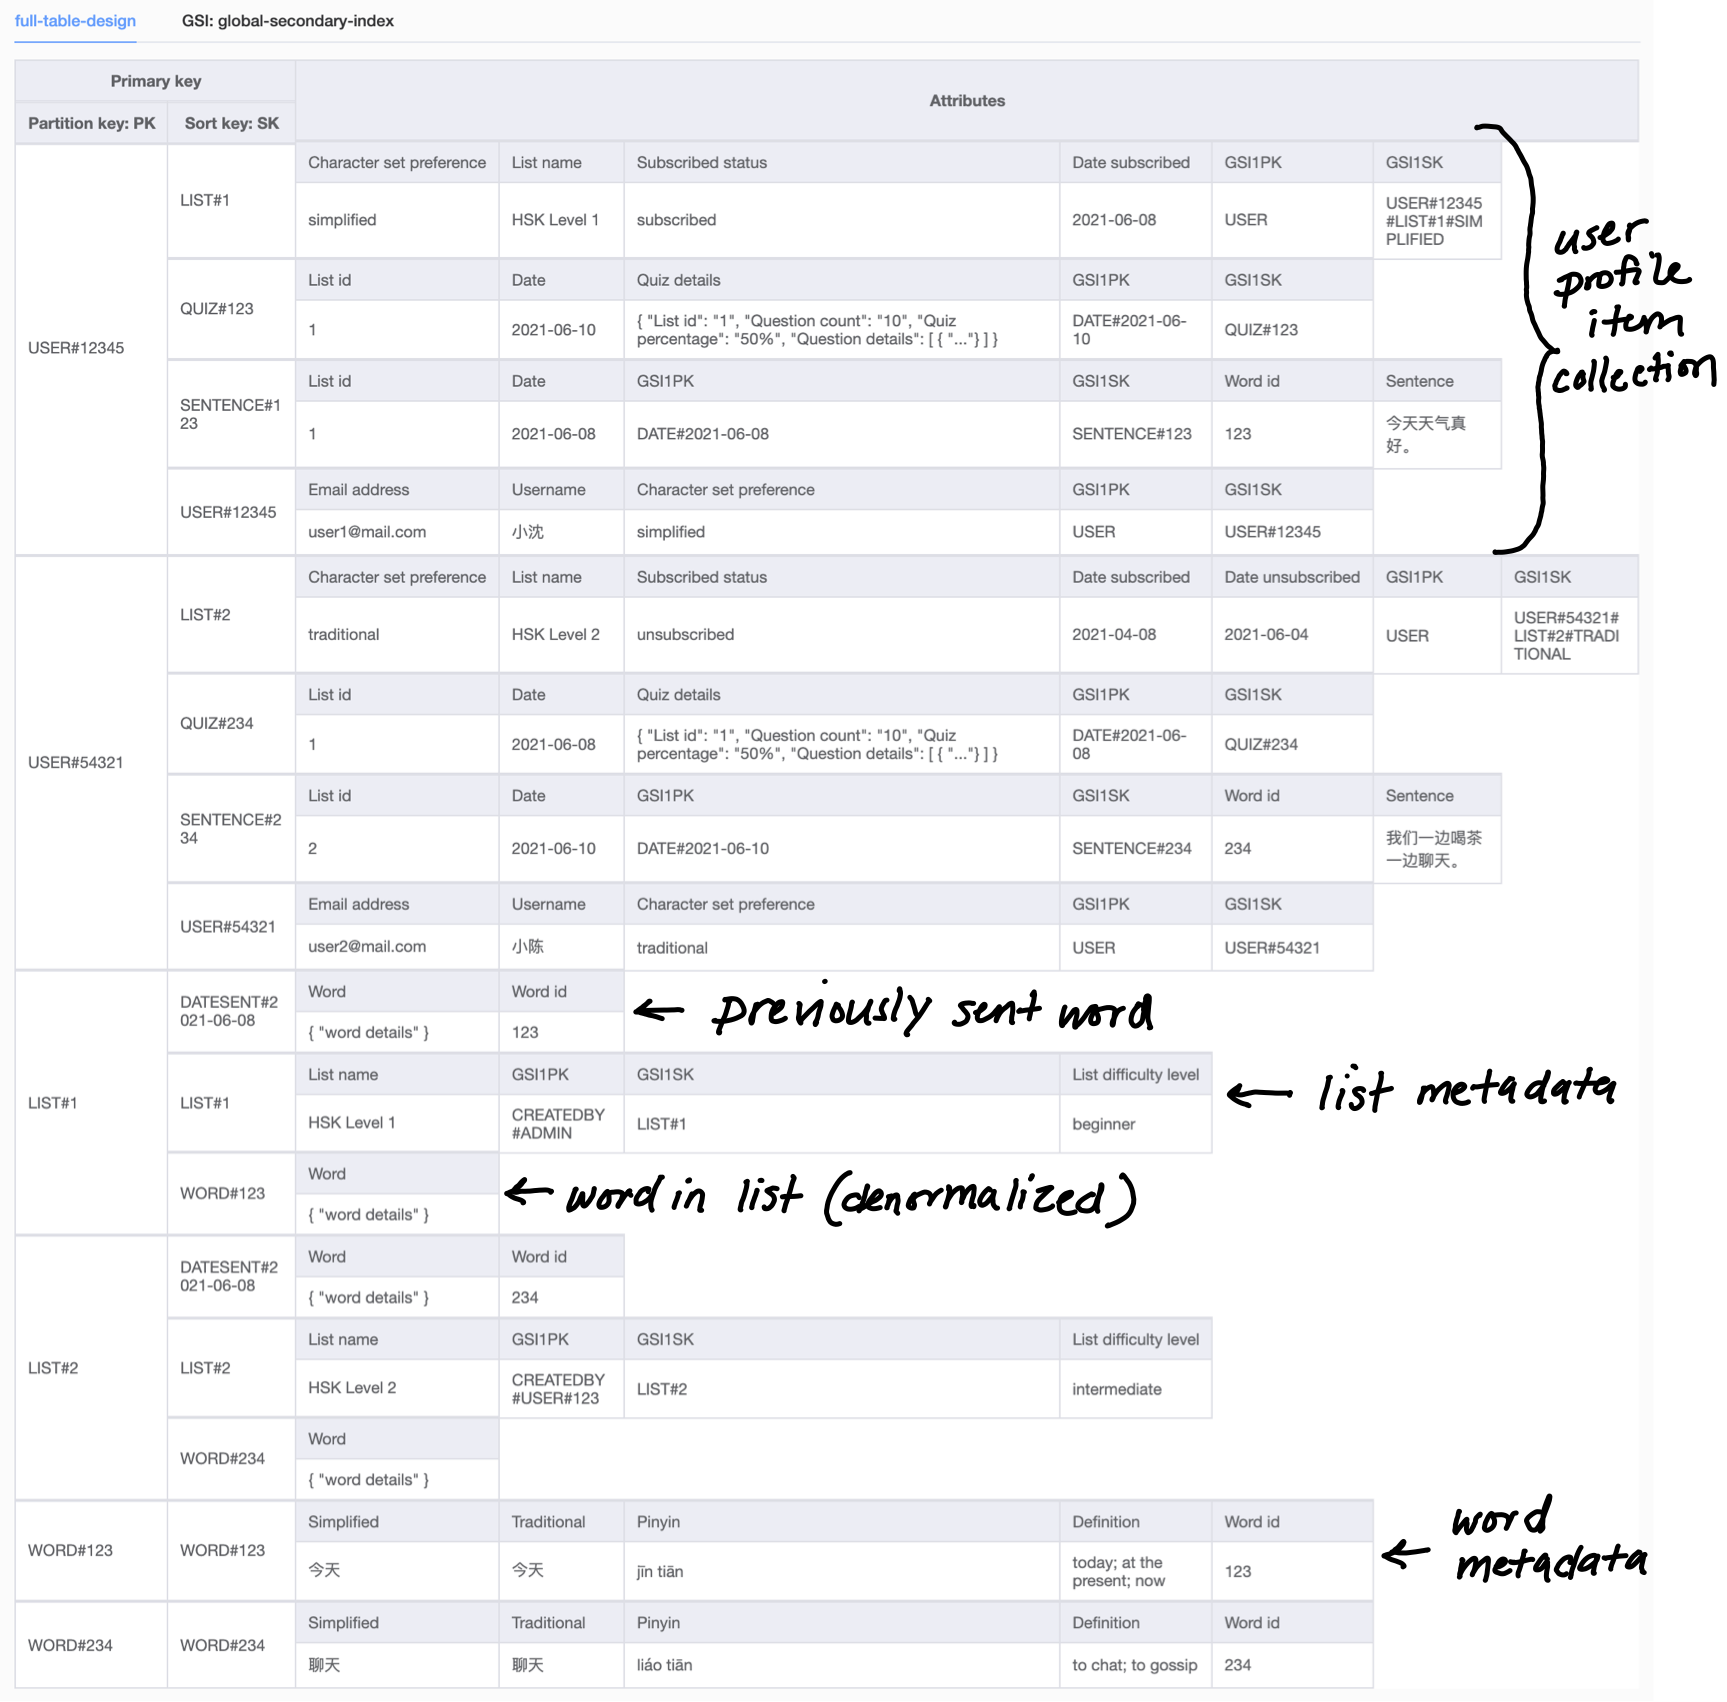 Screenshot of full table design with annotations